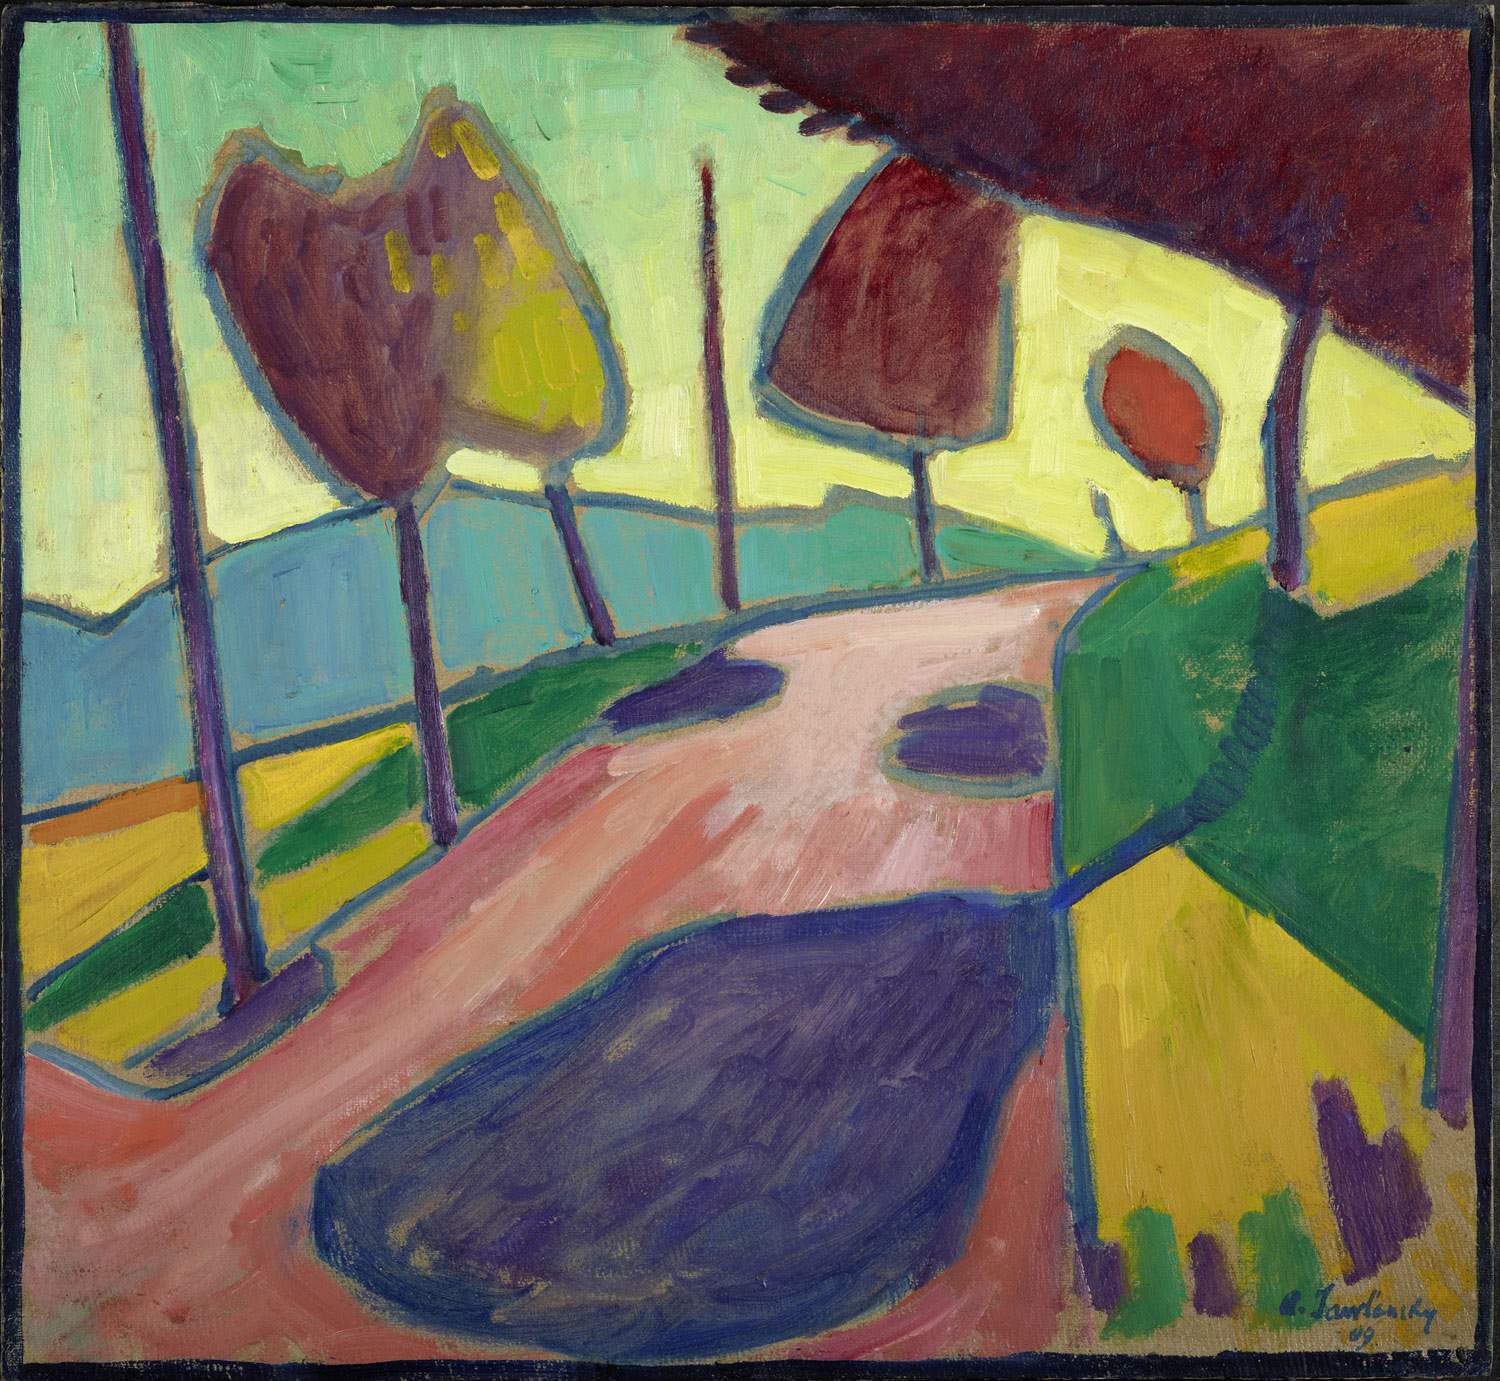 Couple in art and life: the first exhibition on Alexej Jawlensky and Marianne Werefkin